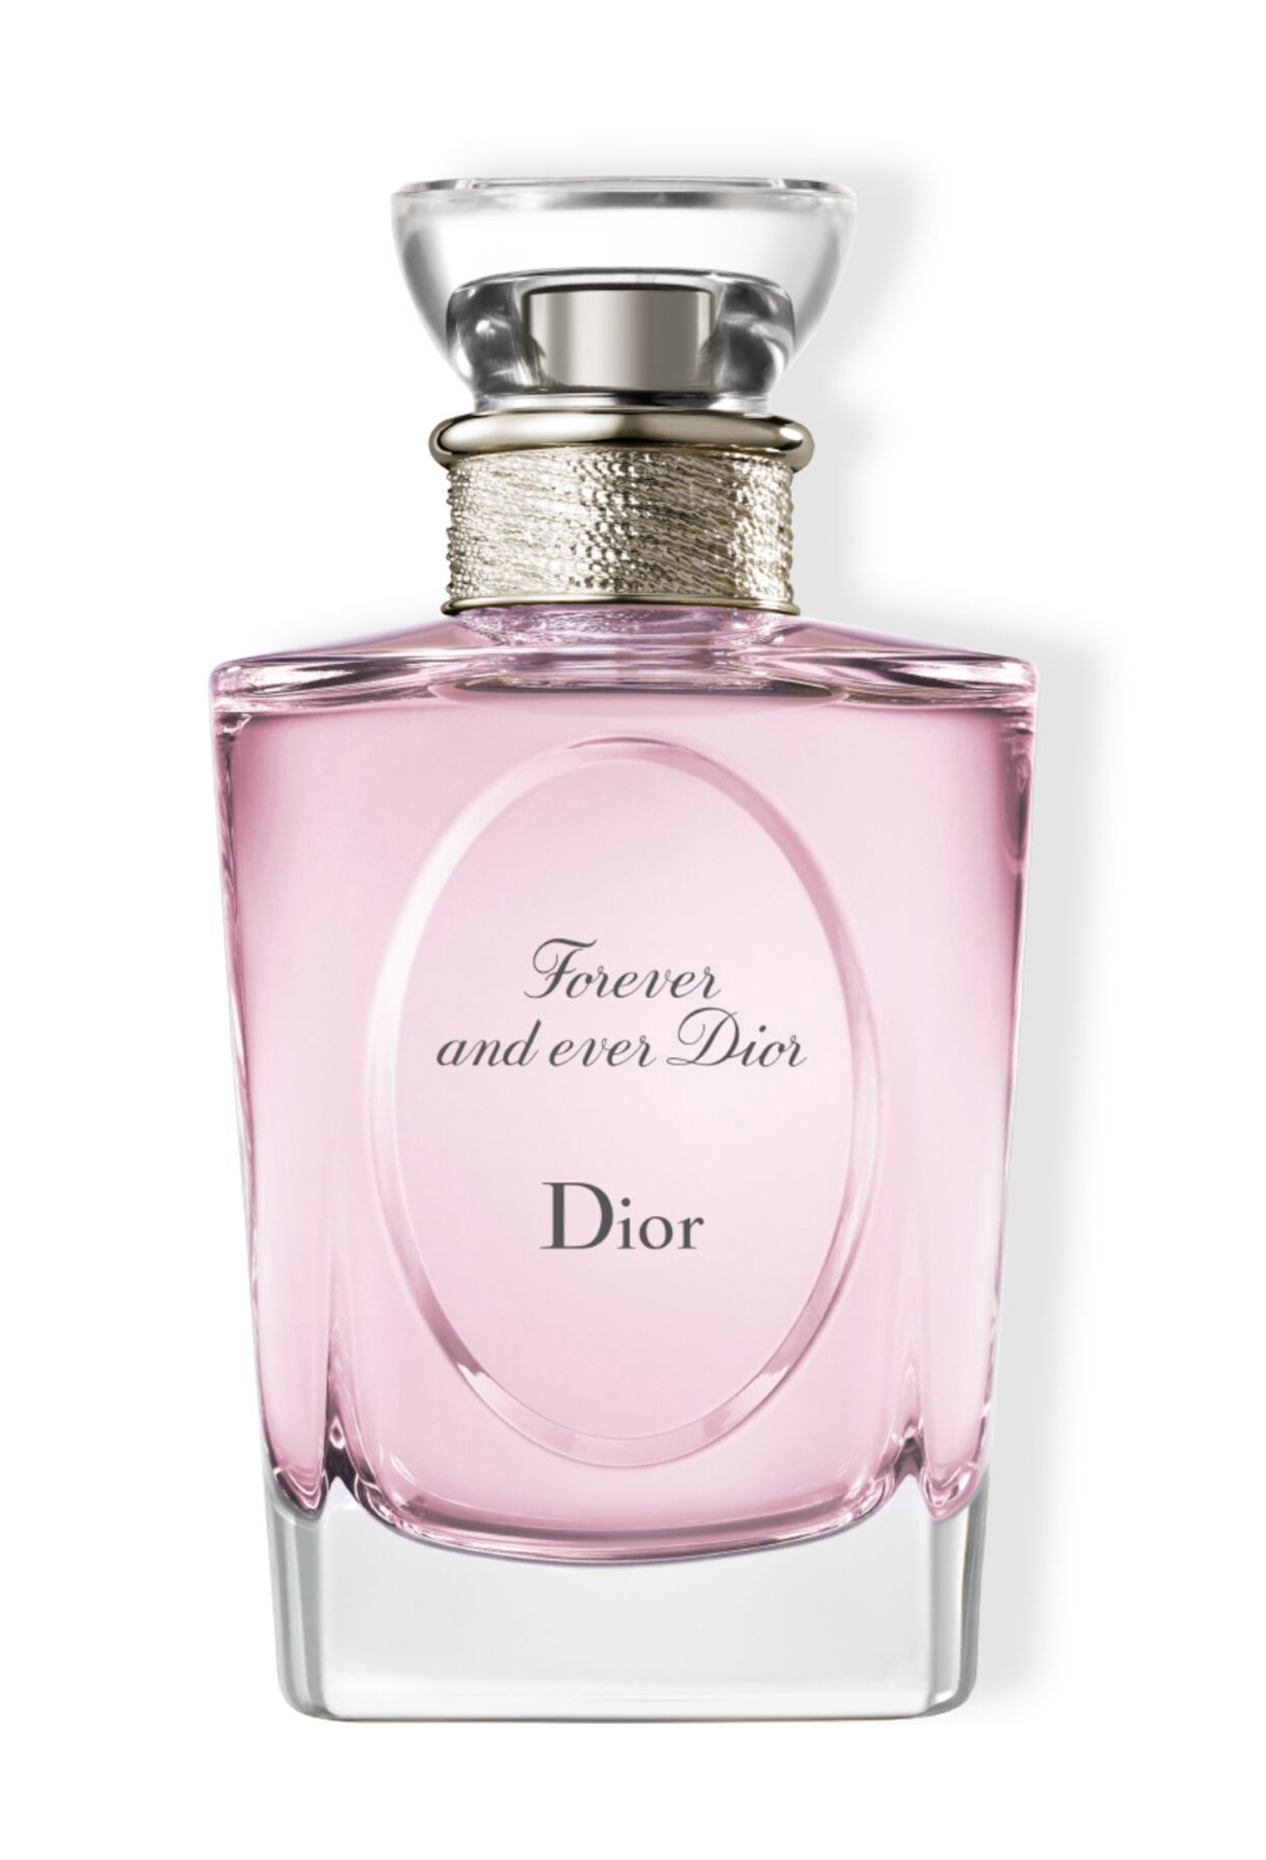 Туалетная вода Dior Forever And Ever, 100 мл туалетная вода dior forever and ever 50 мл